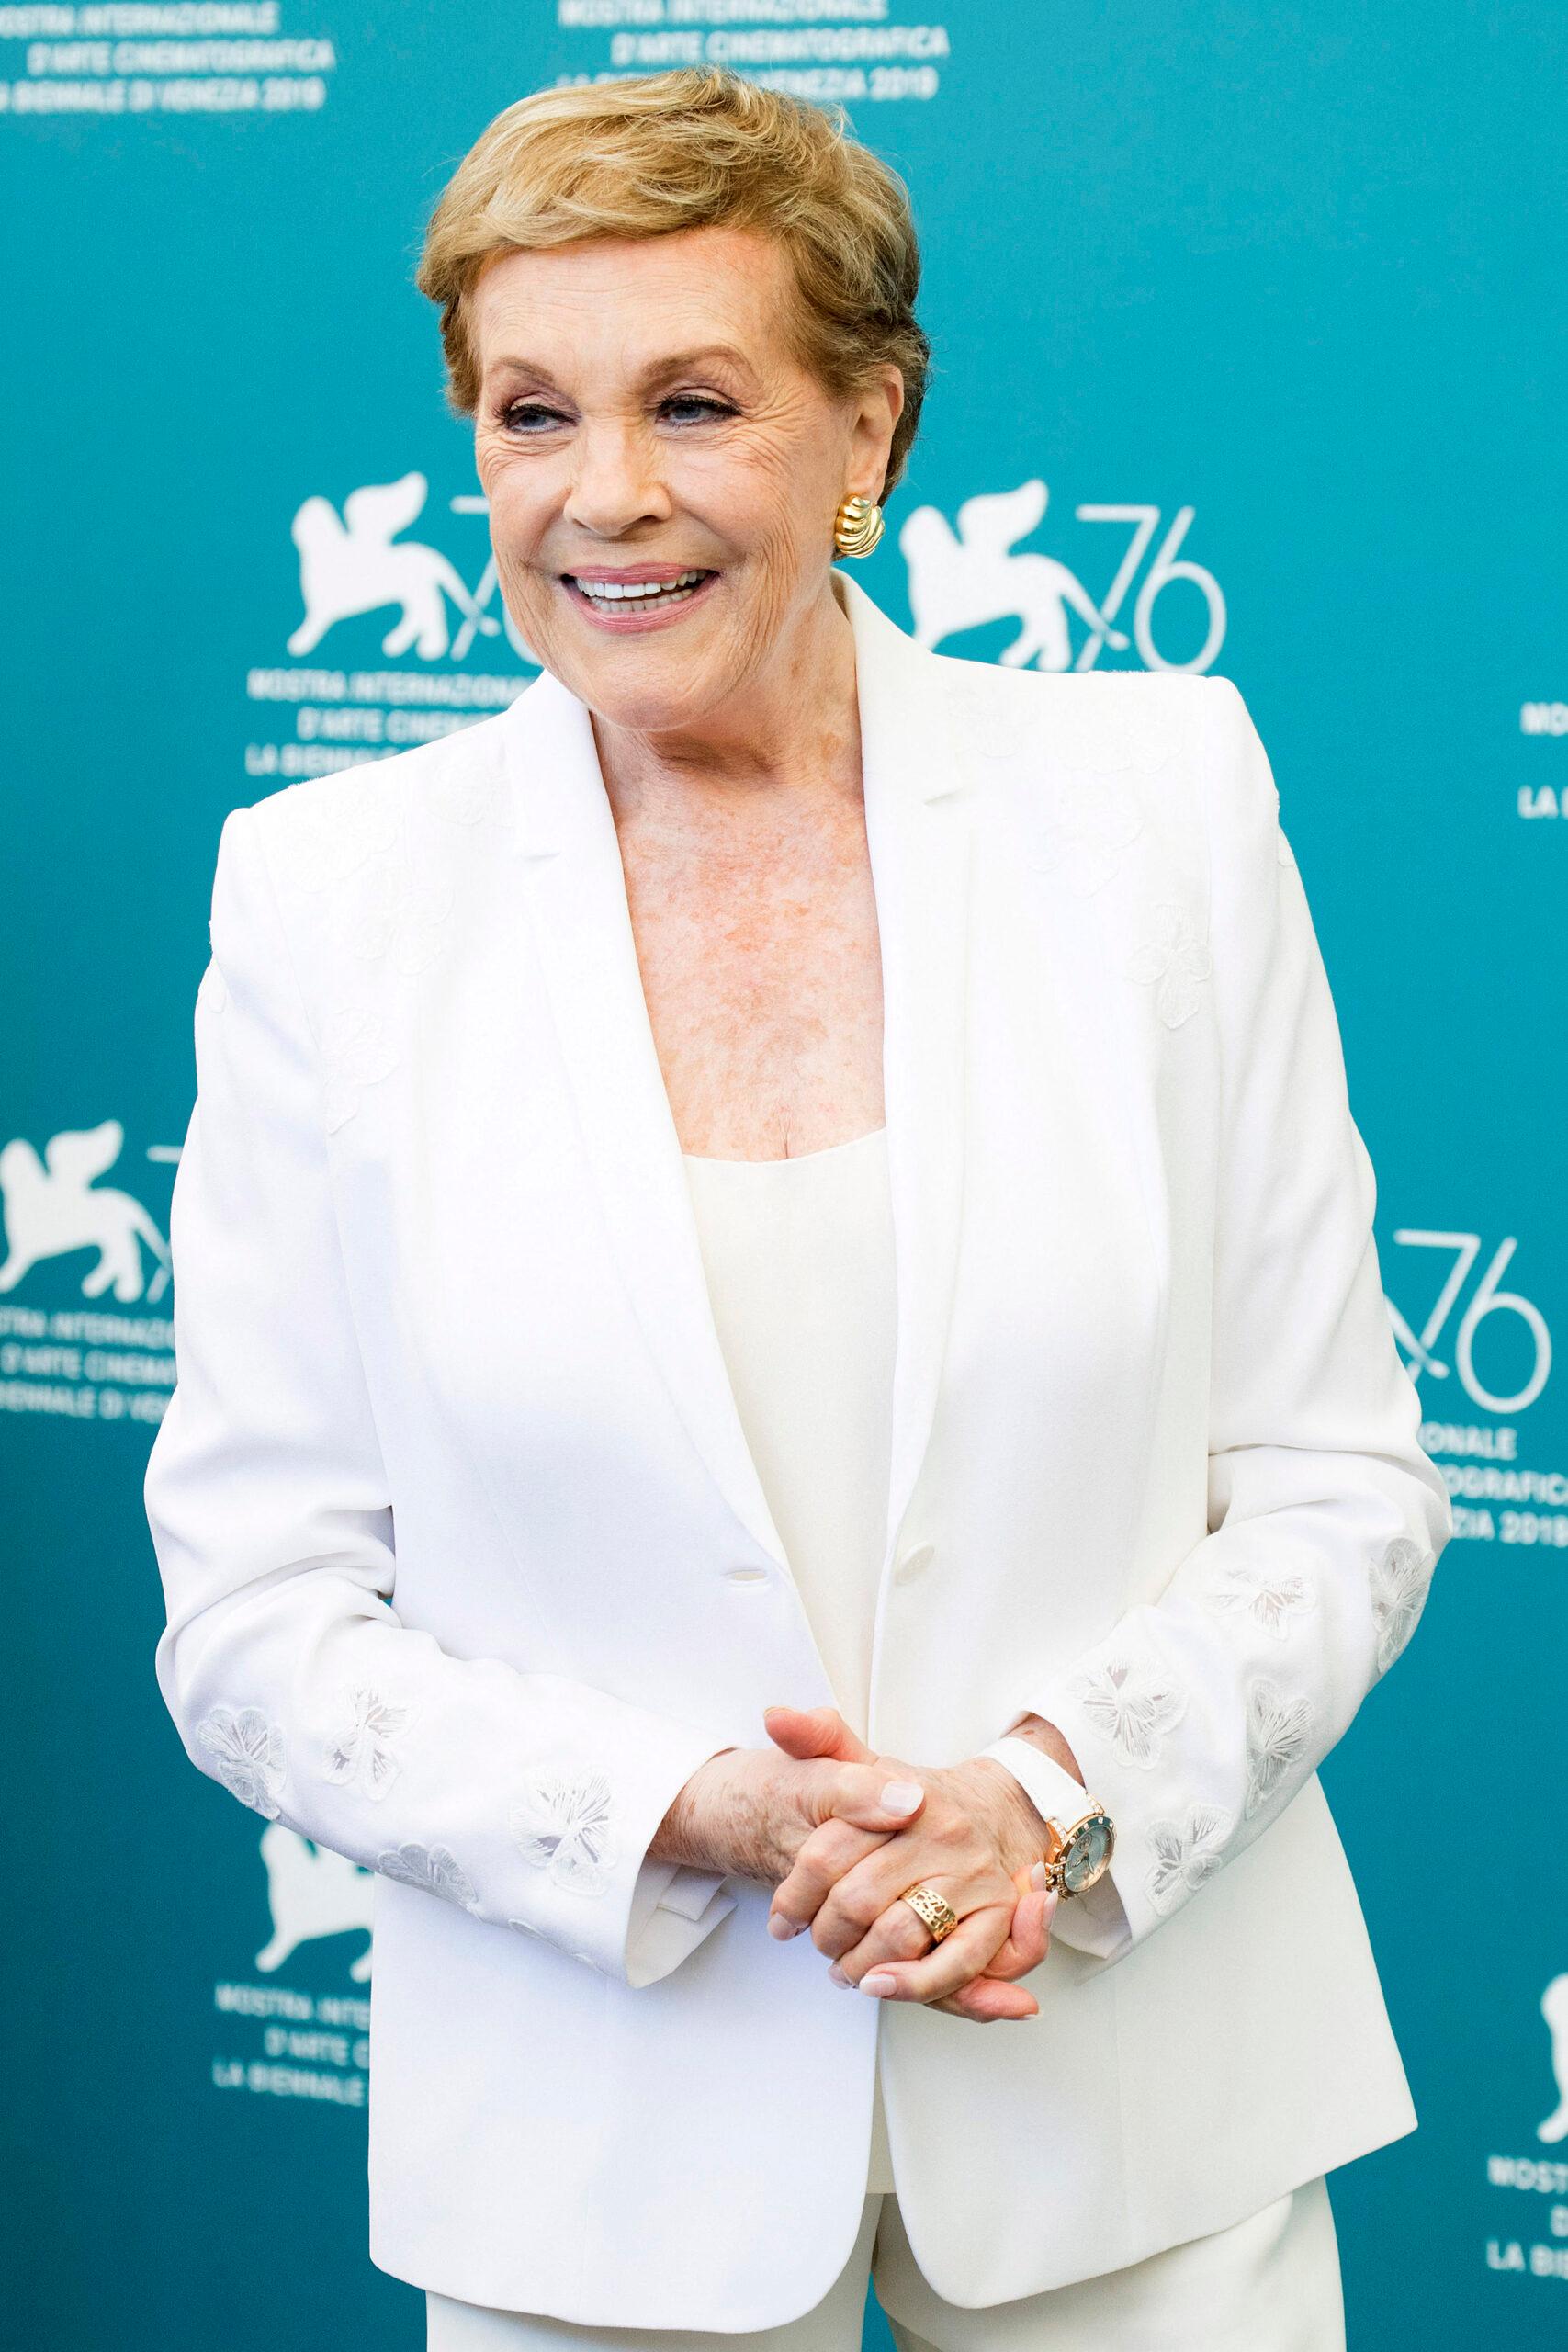 Julie Andrews Recalls Struggles With Stunts On The Set Of 'Mary Poppins': 'I Landed Hard And Was Quite Shaken'